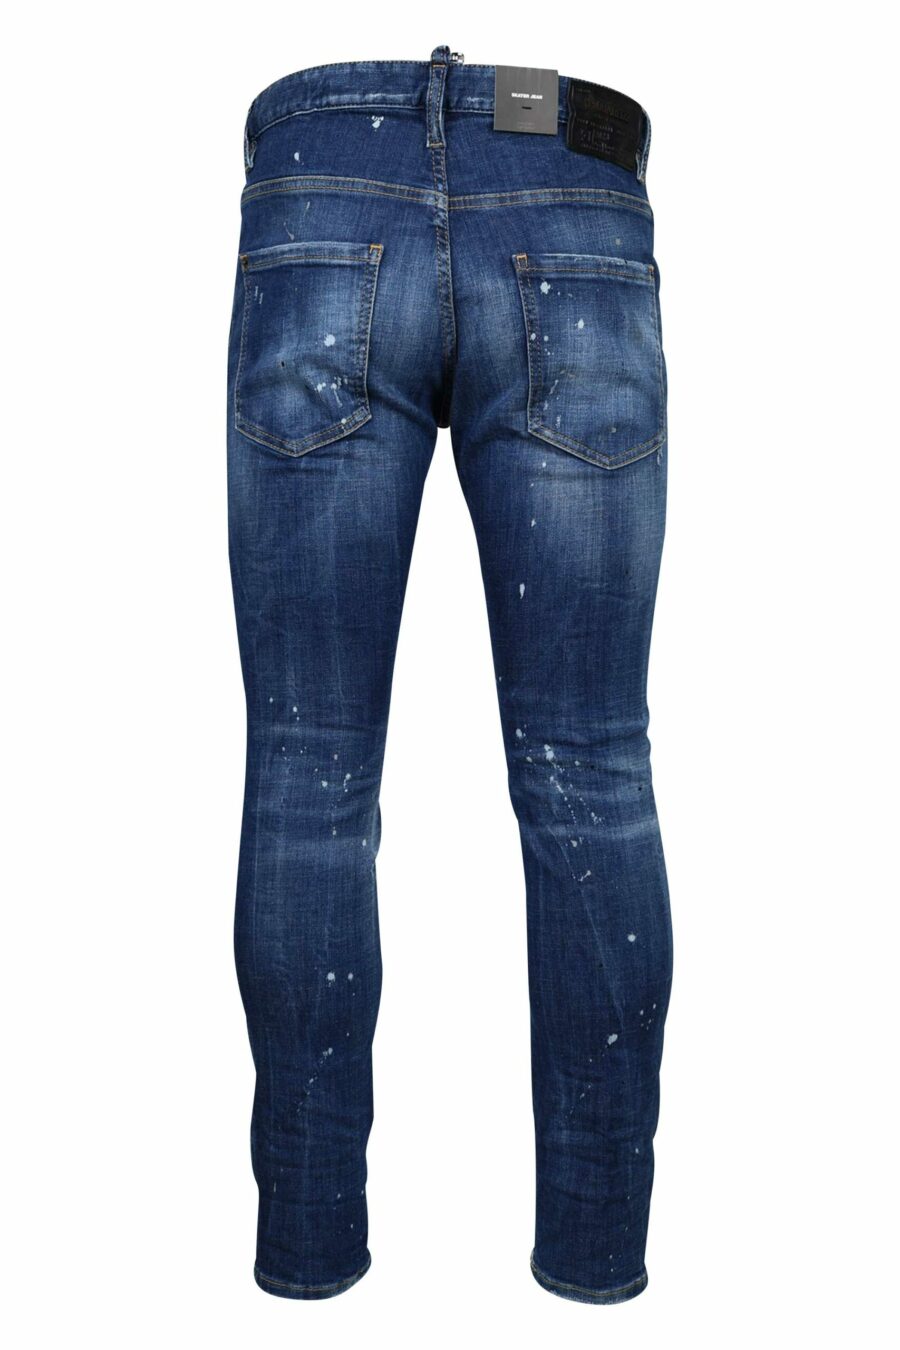 Blue "skater jean" jeans with rips and frayed - 8054148124687 2 1 scaled